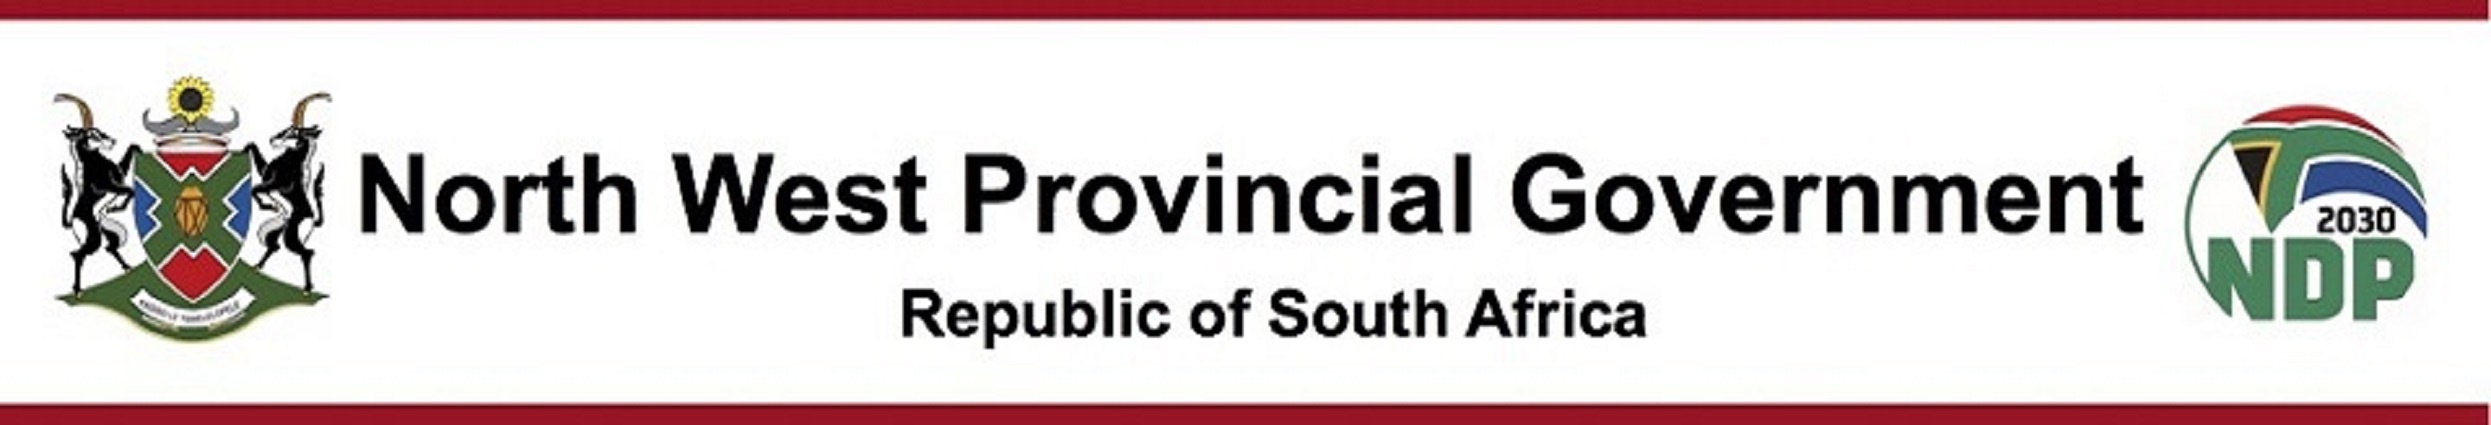 North West Provincial Government